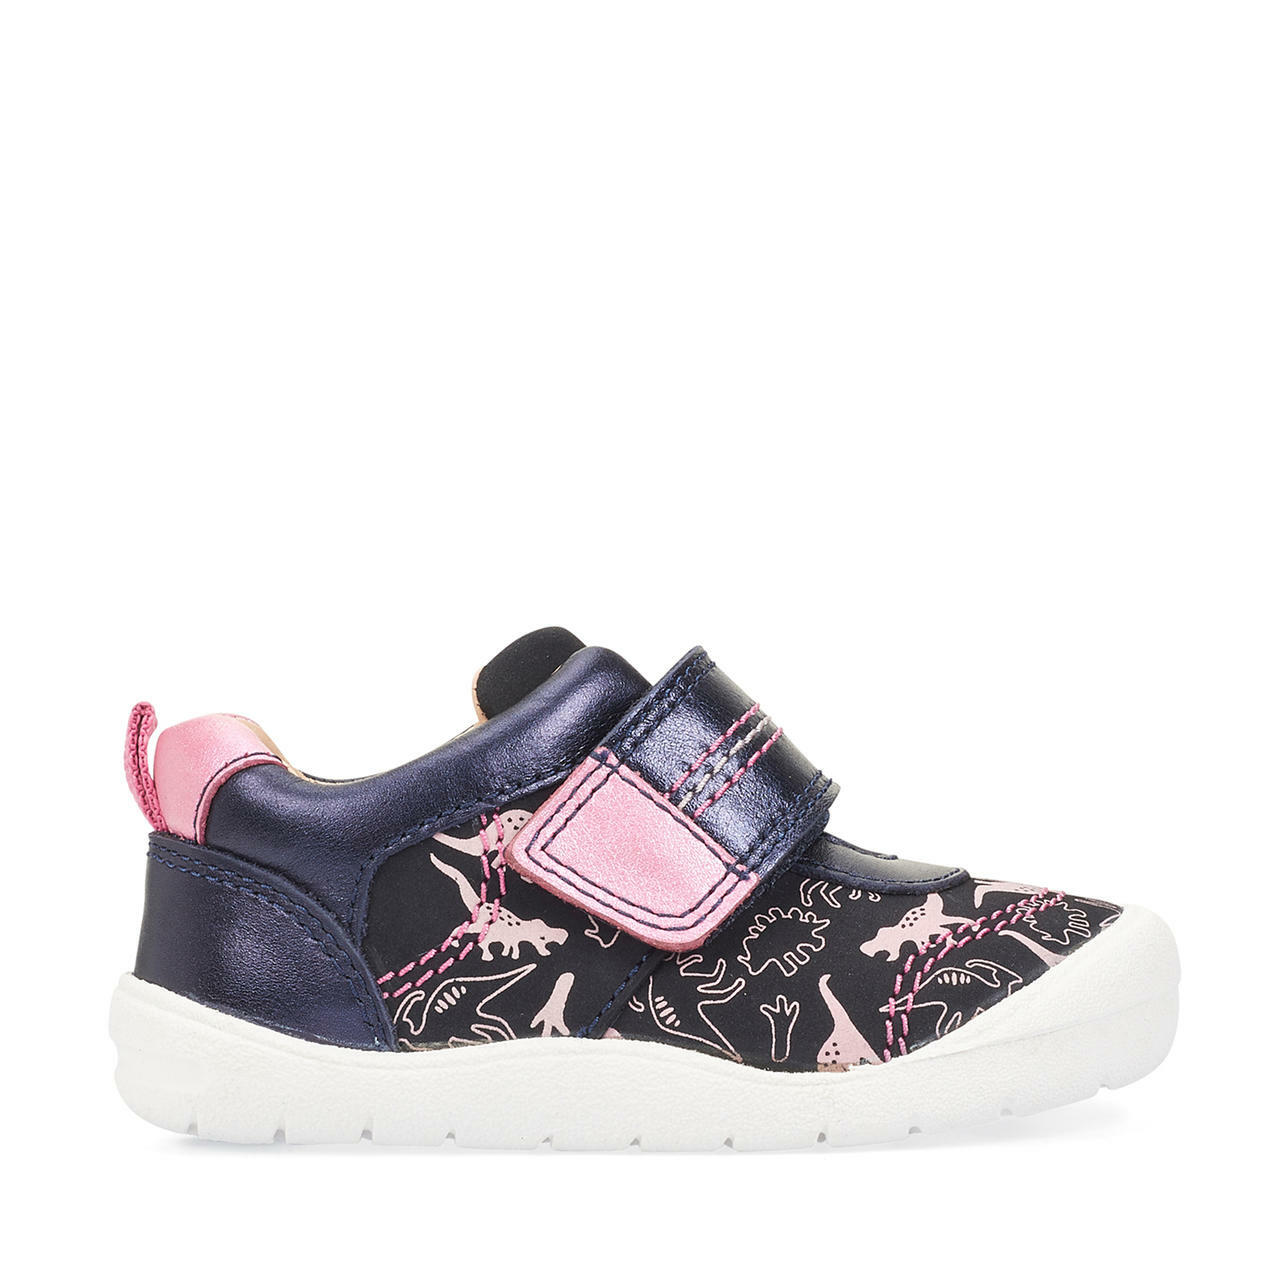 A girls casual shoe by Start Rite, style Footprint, in navy and pink nubuck and leather with velcro fastening. Right side view.